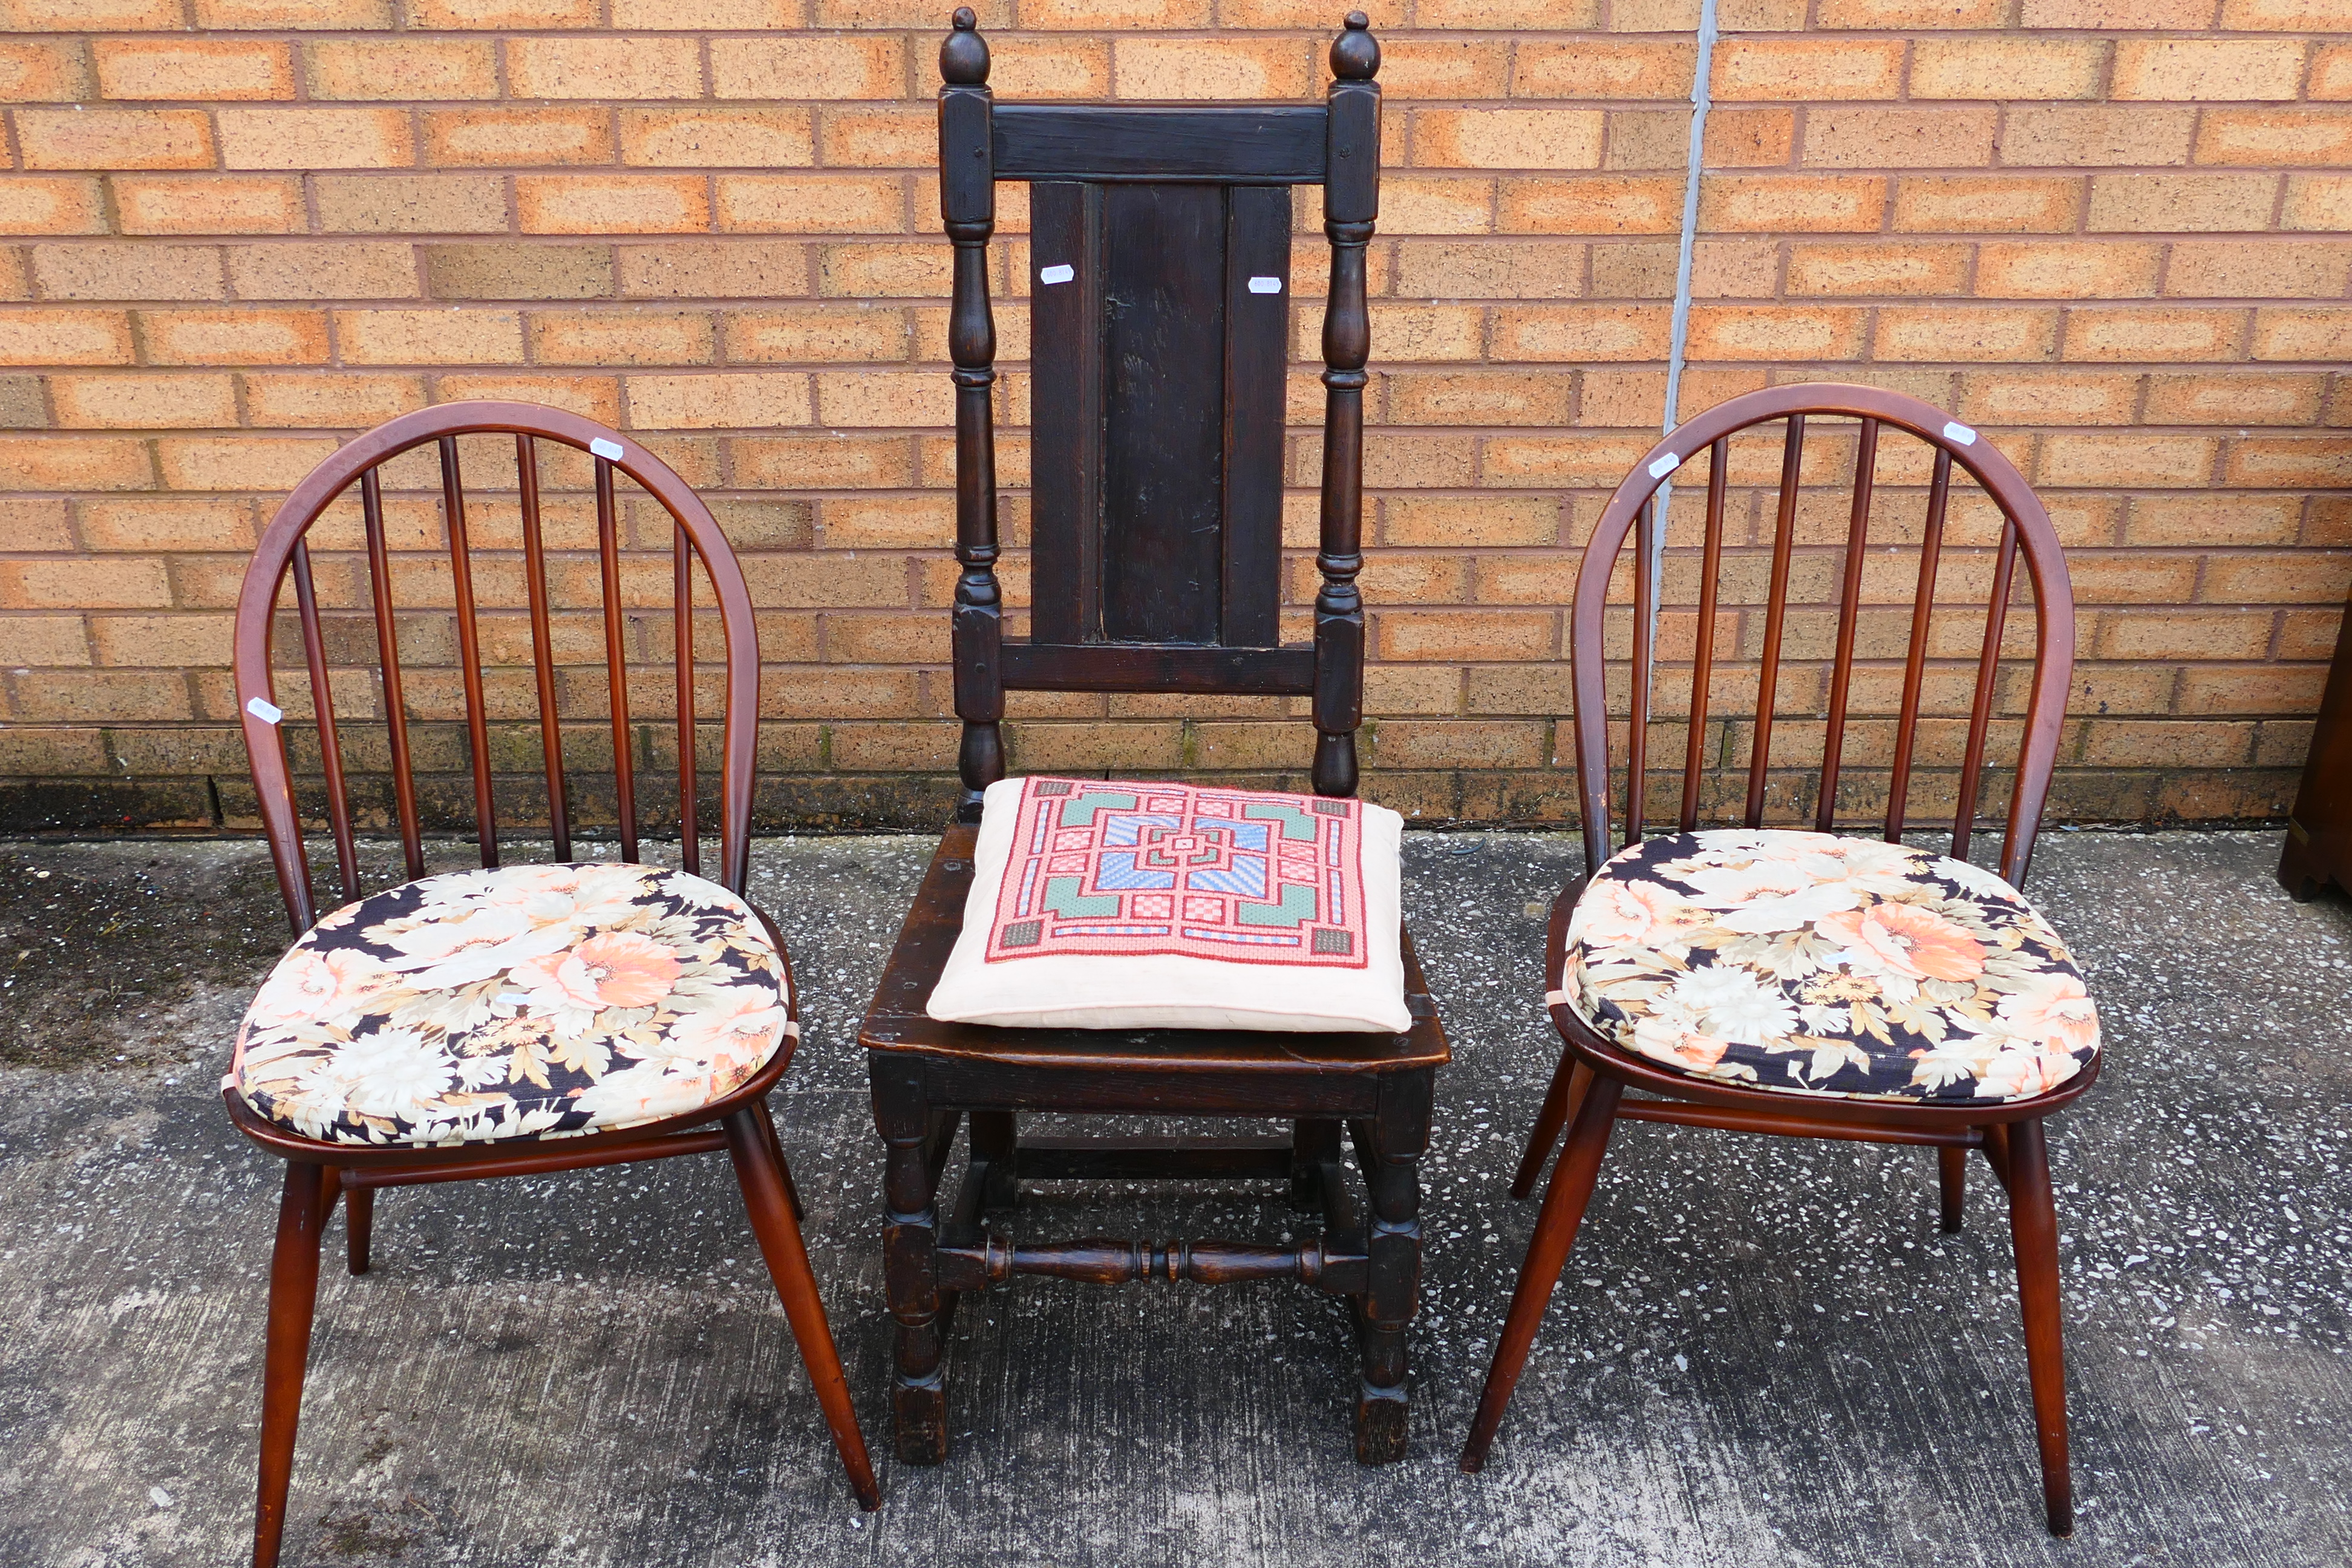 A pair of Ercol Windsor dining chairs and an antique oak side chair. [3].